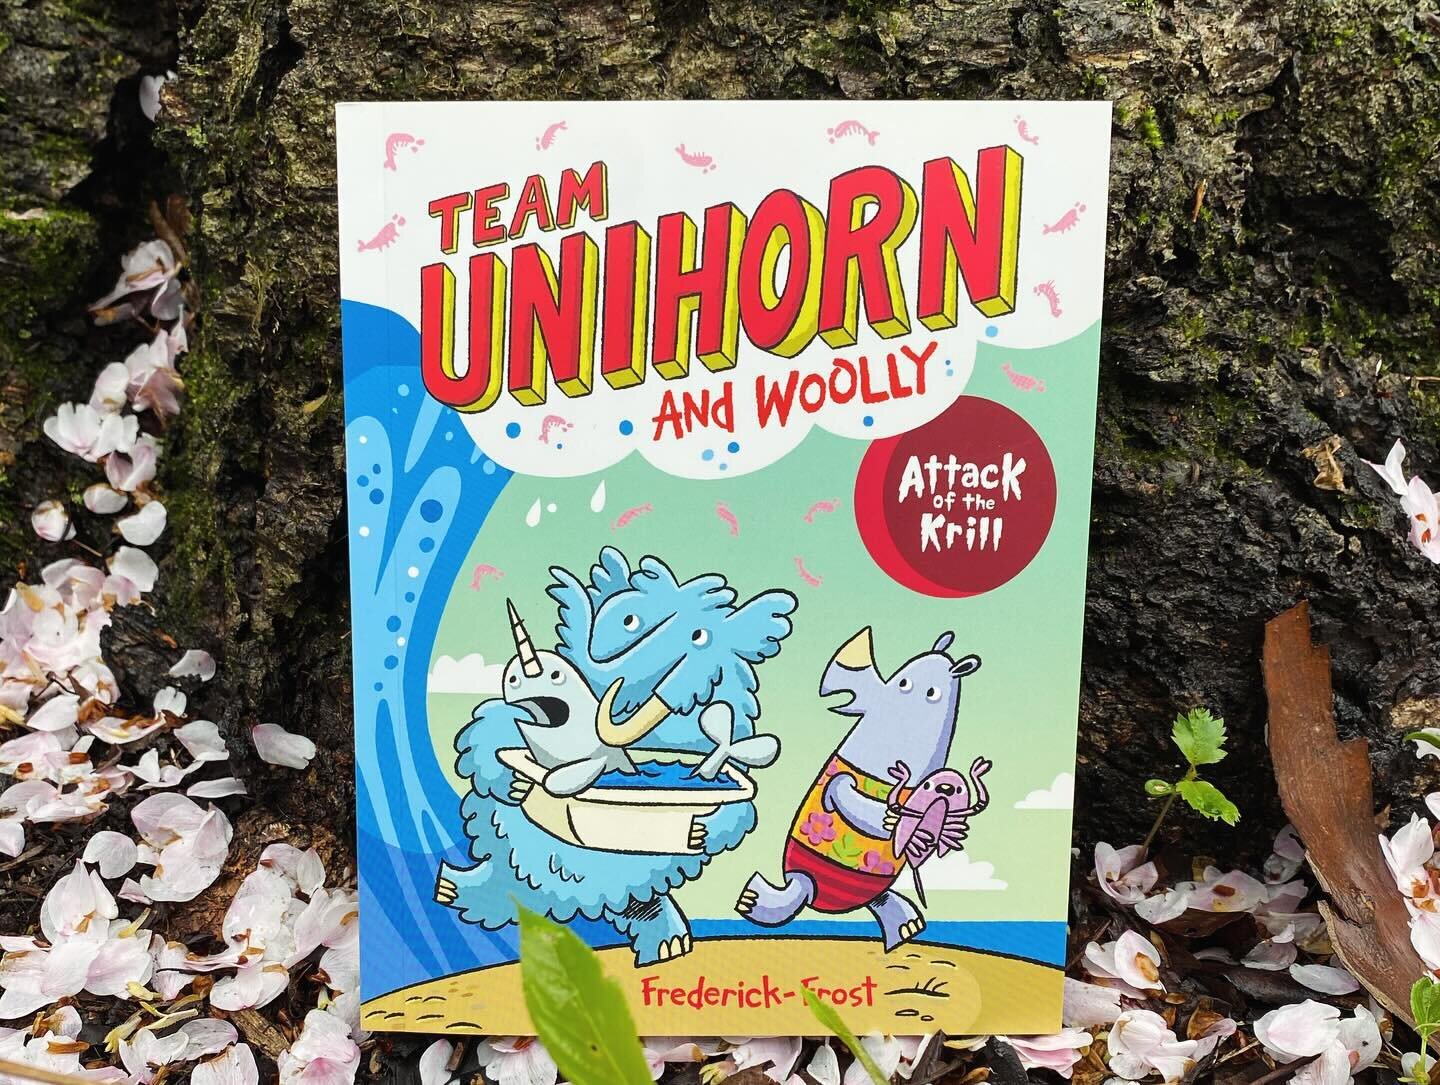 I&rsquo;m very excited to give you a sneak peek of my new graphic novel, TEAM UNIHORN AND WOOLLY, which will be coming out April 16th. Available for pre-order now.

#harperalley #graphicnovels #kidscomics